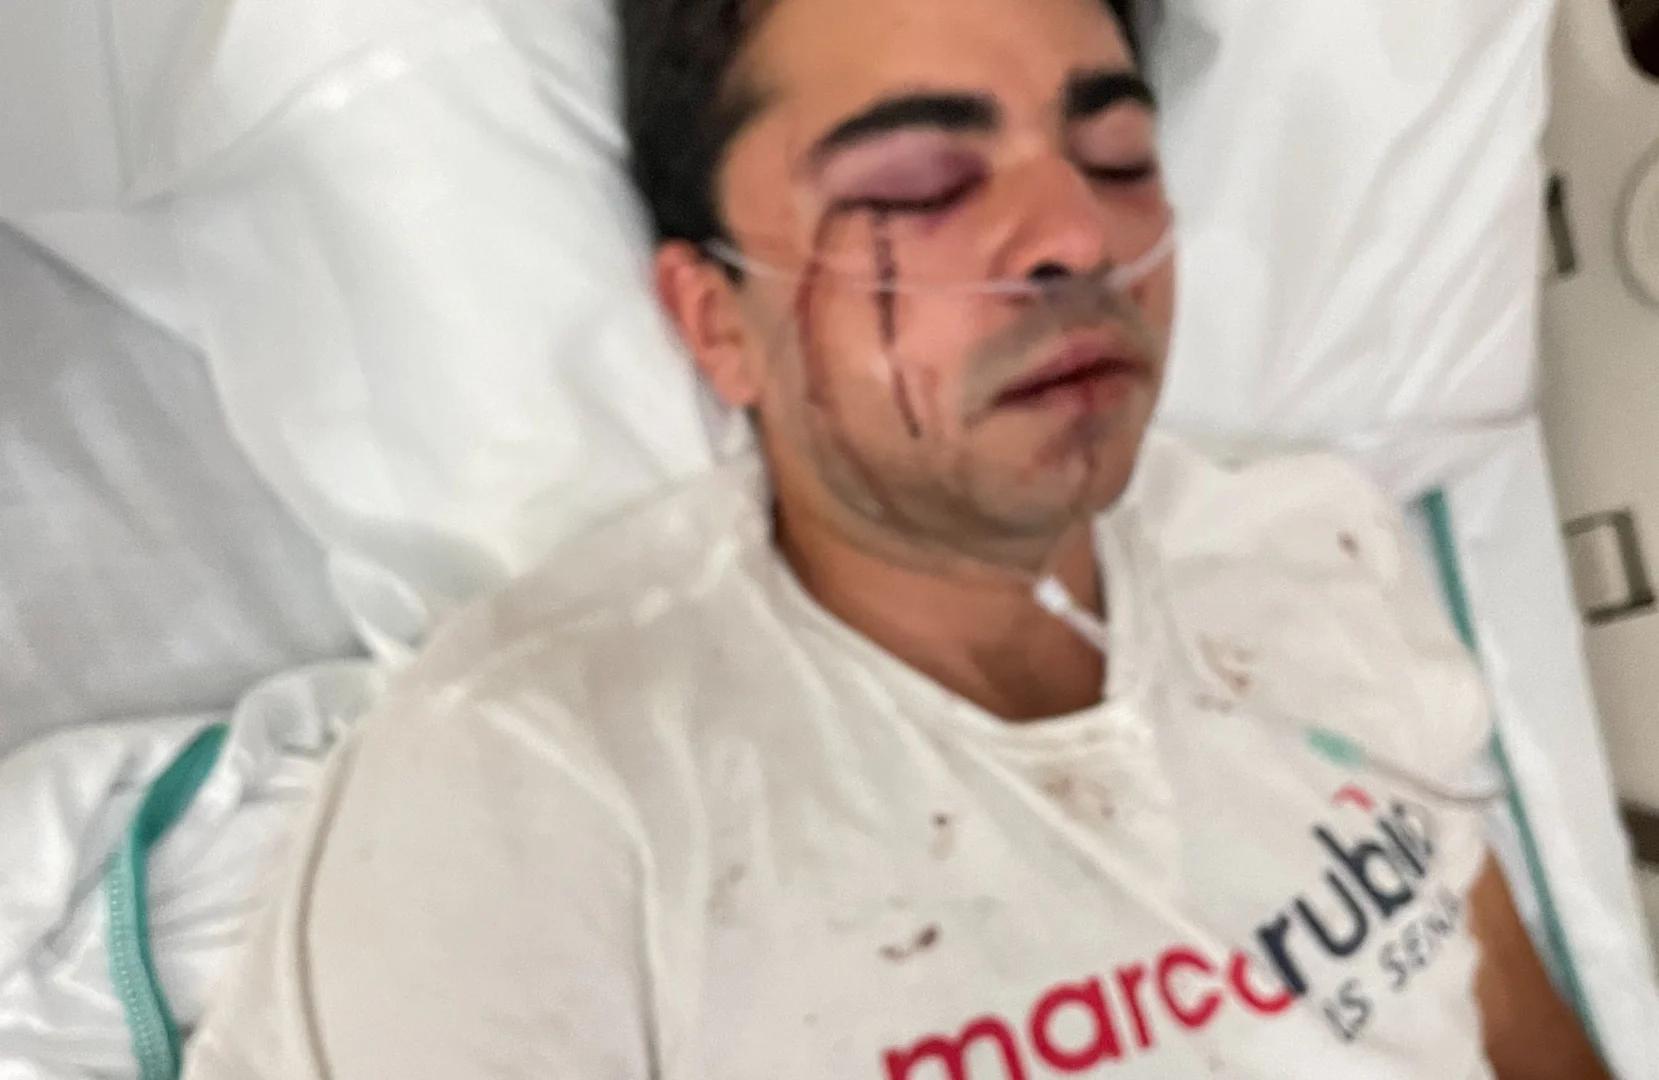 Republican campaign canvasser seriously injured in brutal attack